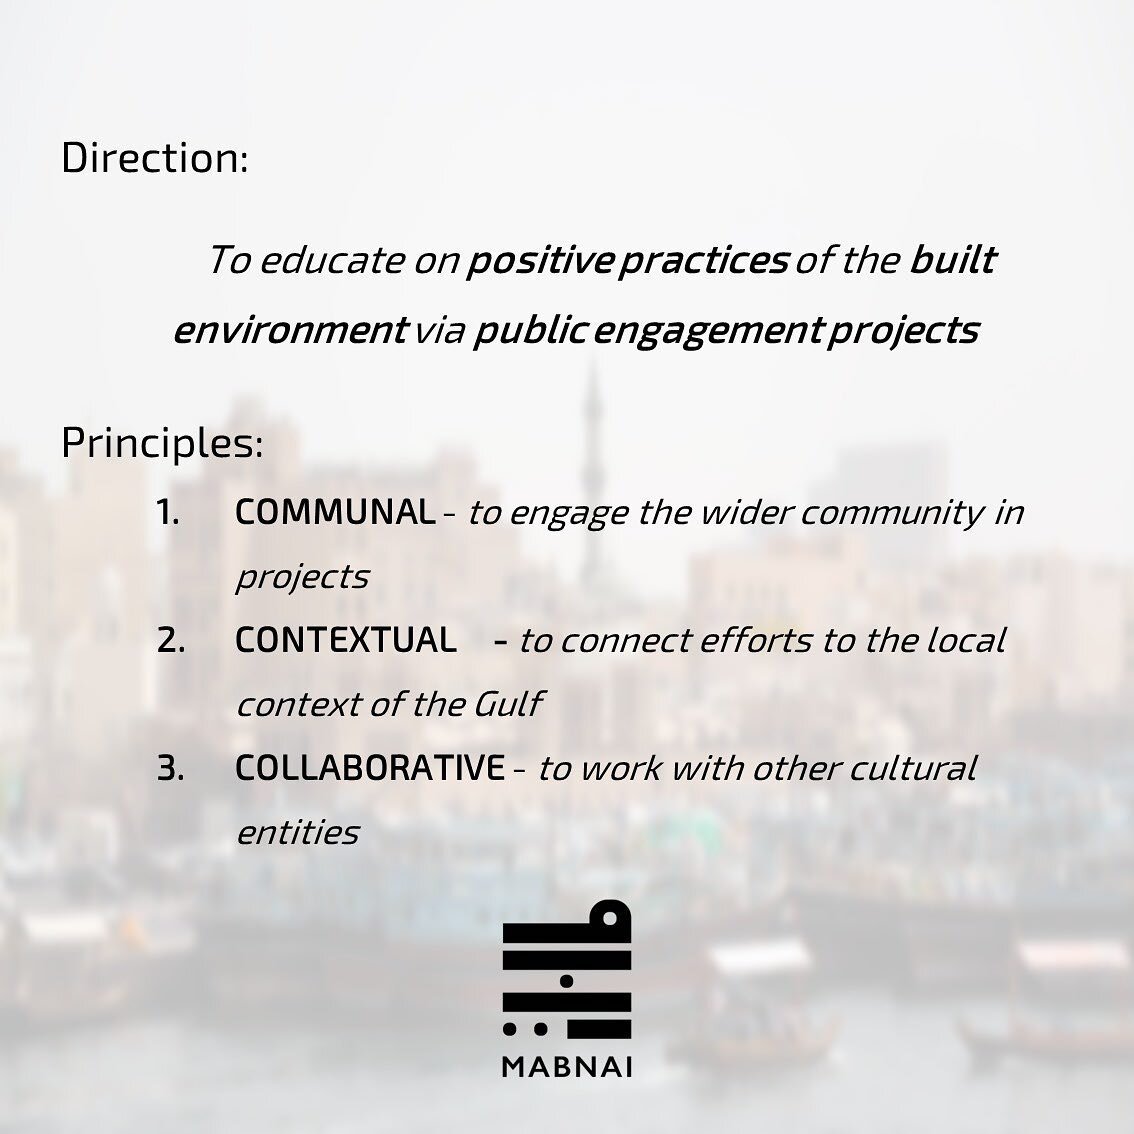 MABNAI aims to educate on positive practices of the built environment (e.g., architecture, urban planning/design, archival history) via public engagement projects (e.g., exhibitions, research initiatives, symposiums)

MABNAI is built on three essenti